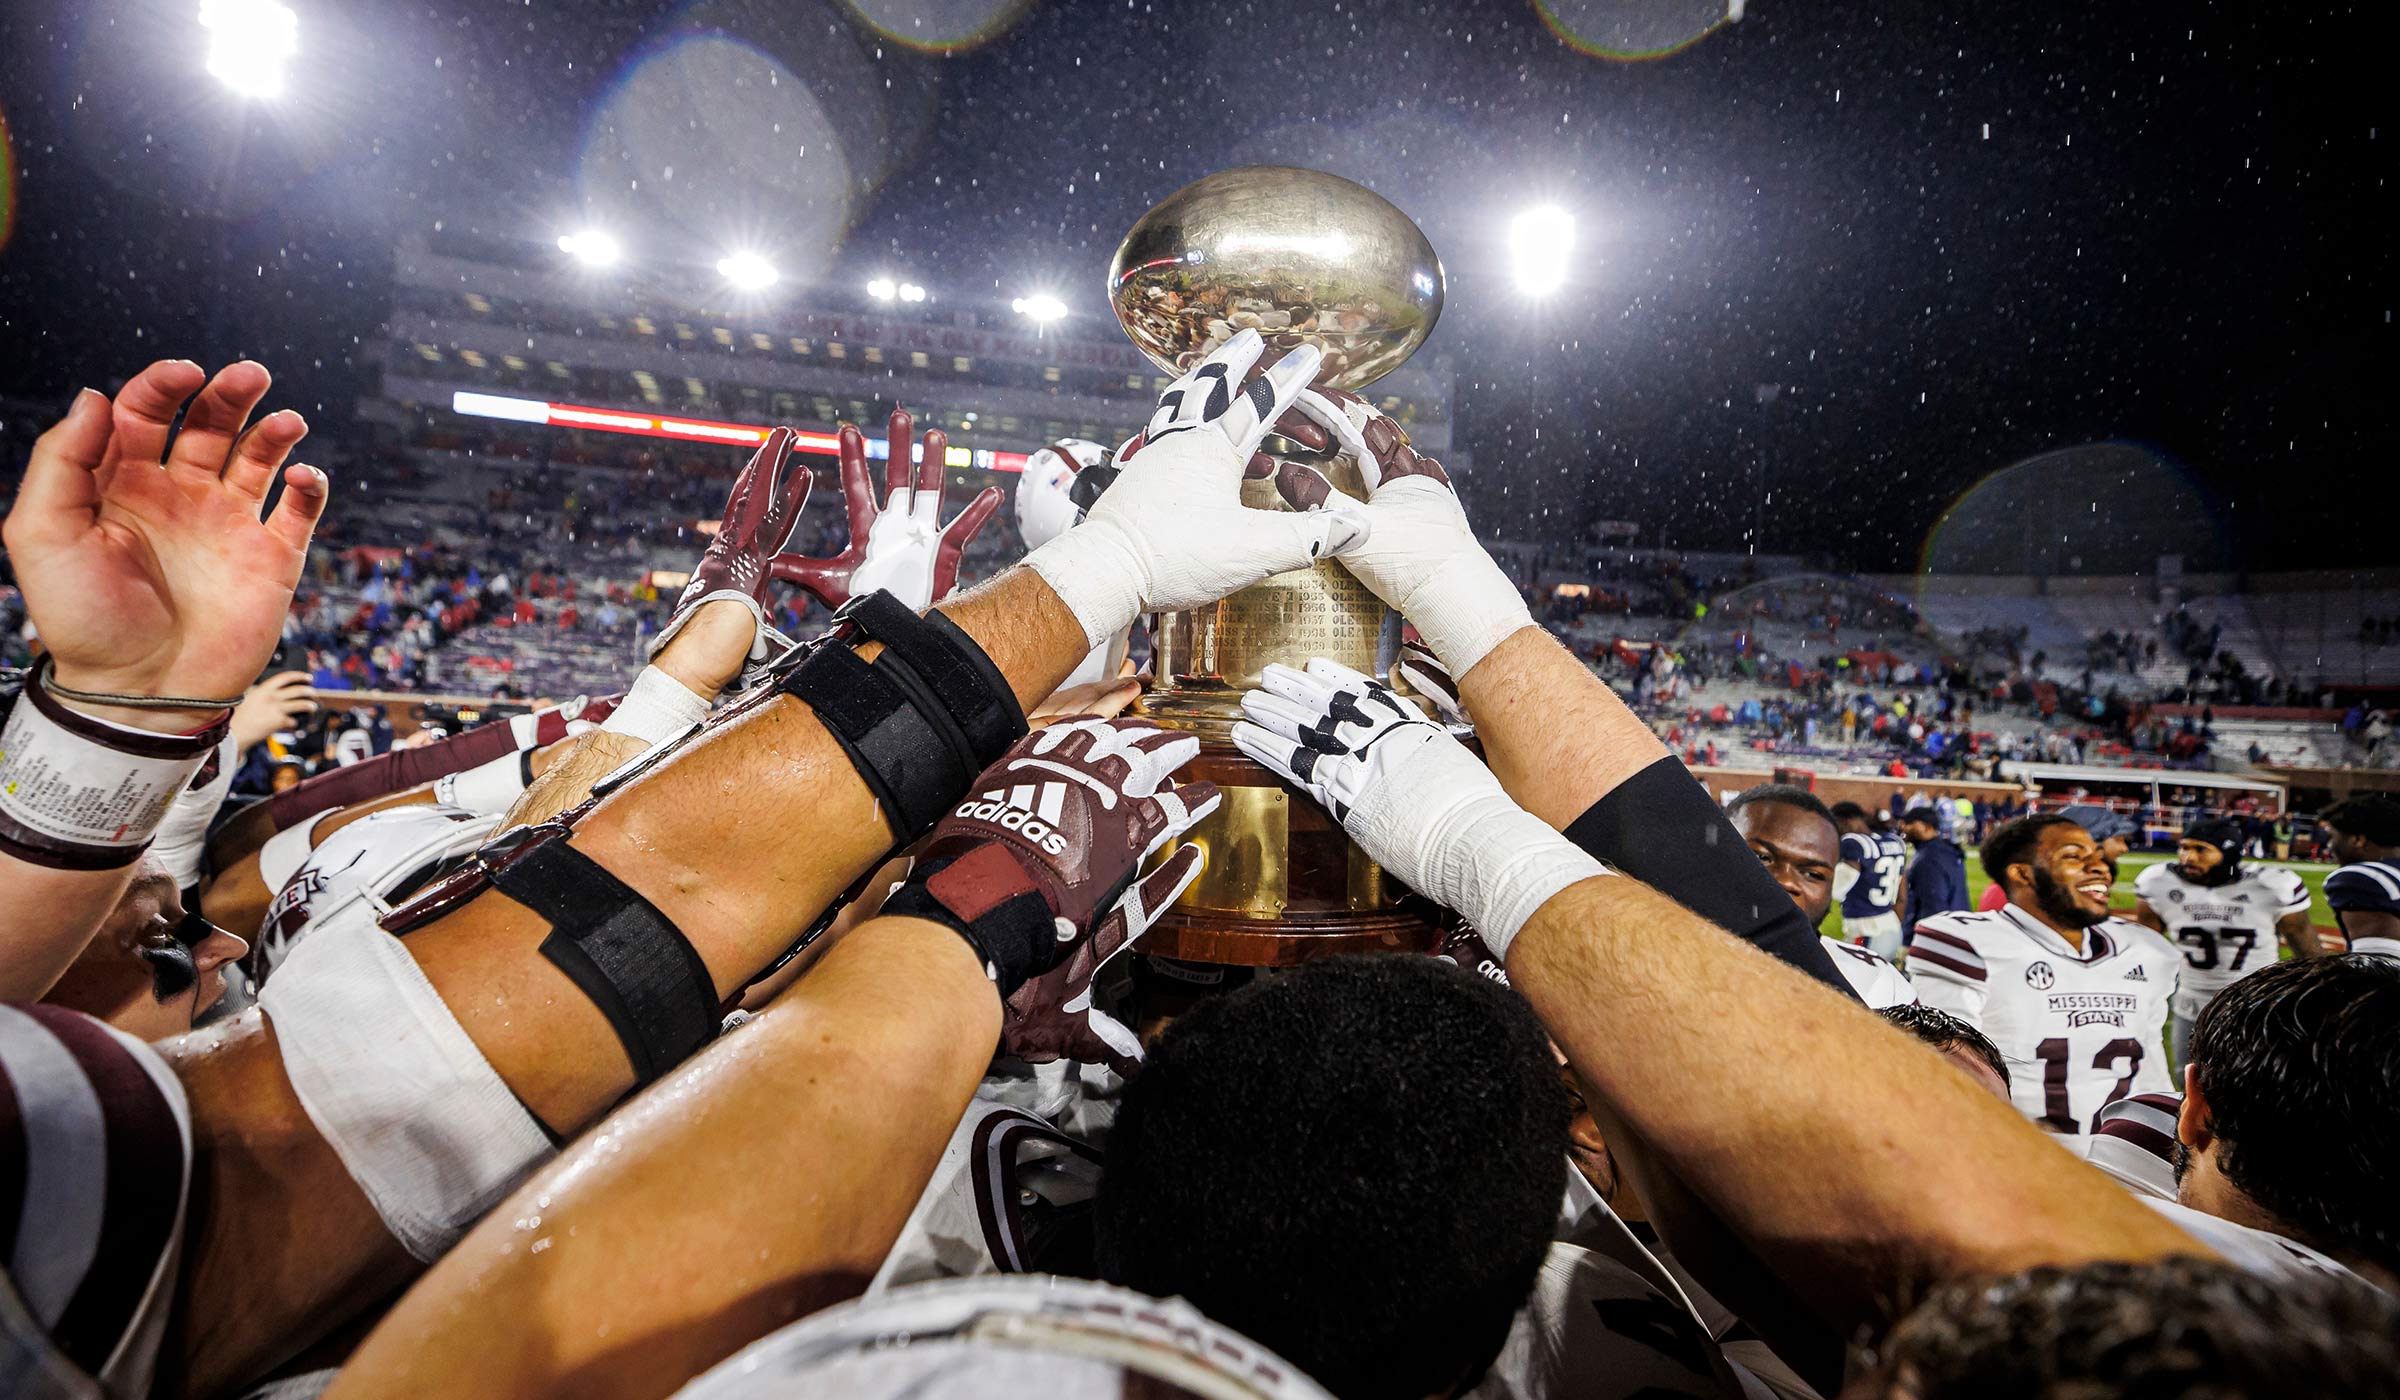 Football players in maroon and white holding a golden egg trophy above their heads as a team